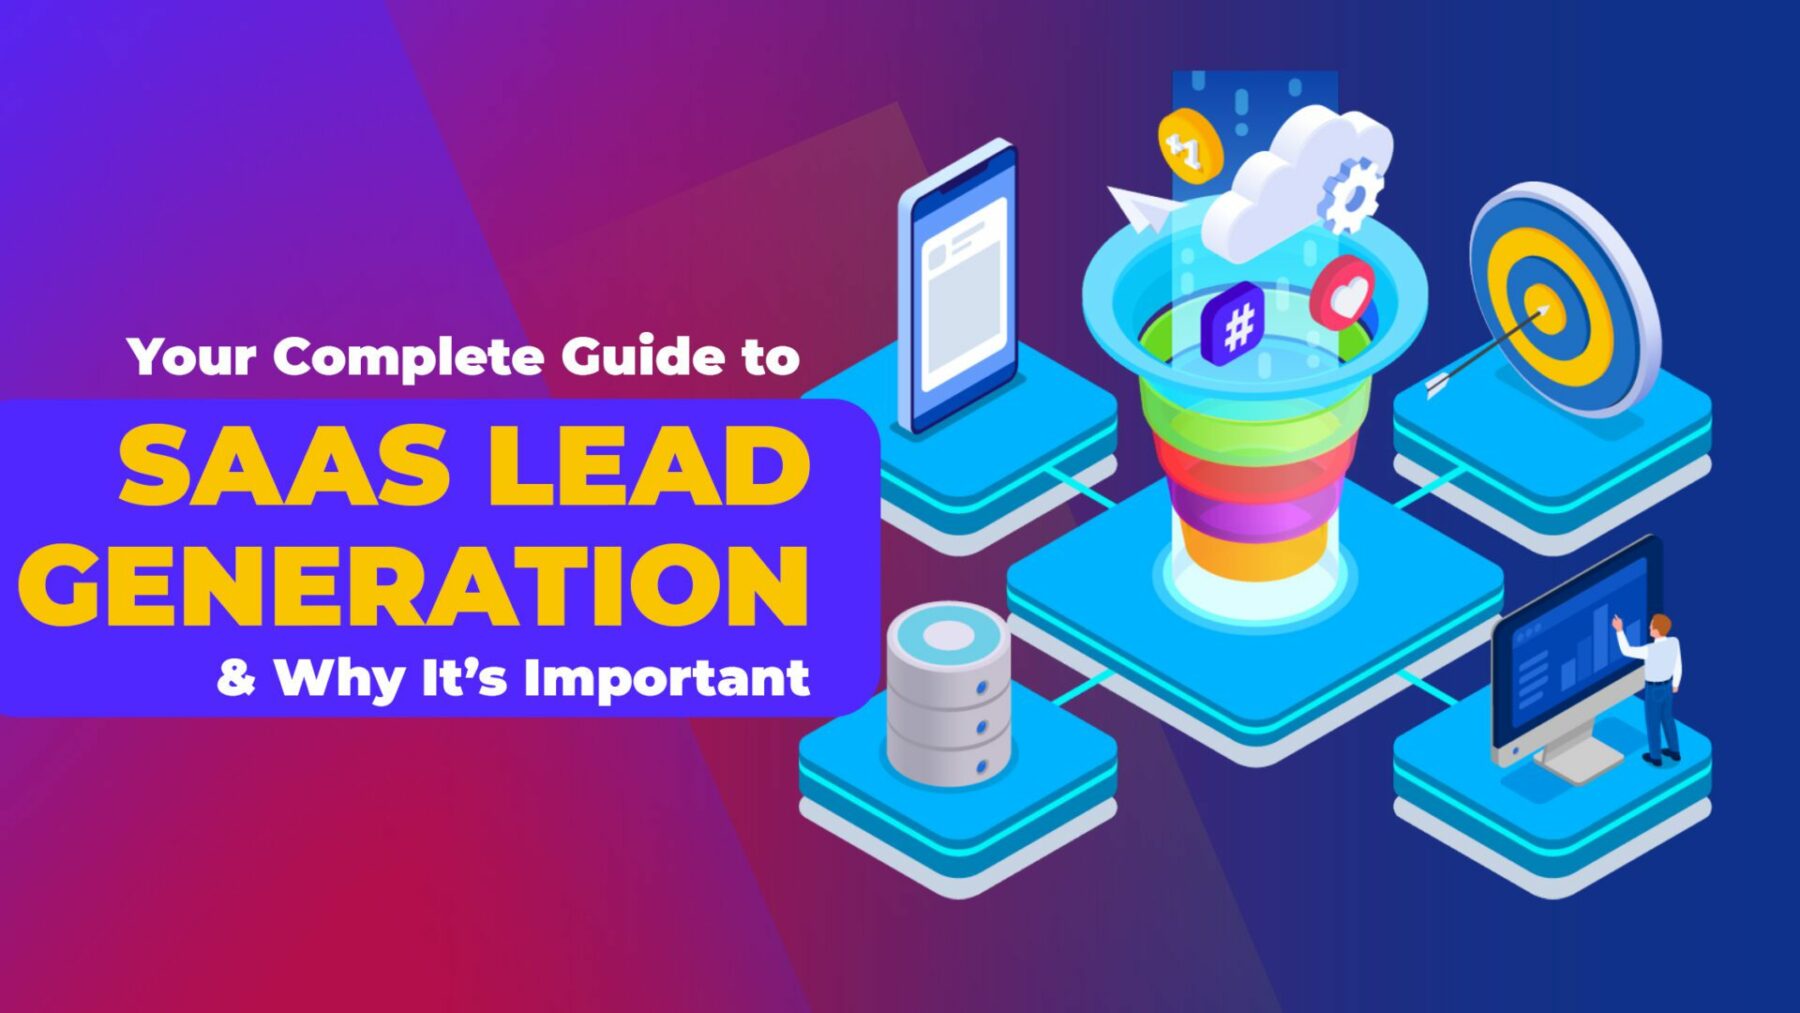 The image features a vibrant banner with the text 'Your Complete Guide to SAAS LEAD GENERATION & Why It's Important.' It includes graphic elements such as a funnel with icons representing leads, a mobile device, cloud computing imagery, data servers, and a person giving a presentation, all symbolizing different aspects of the SaaS (Software as a Service) lead generation process.